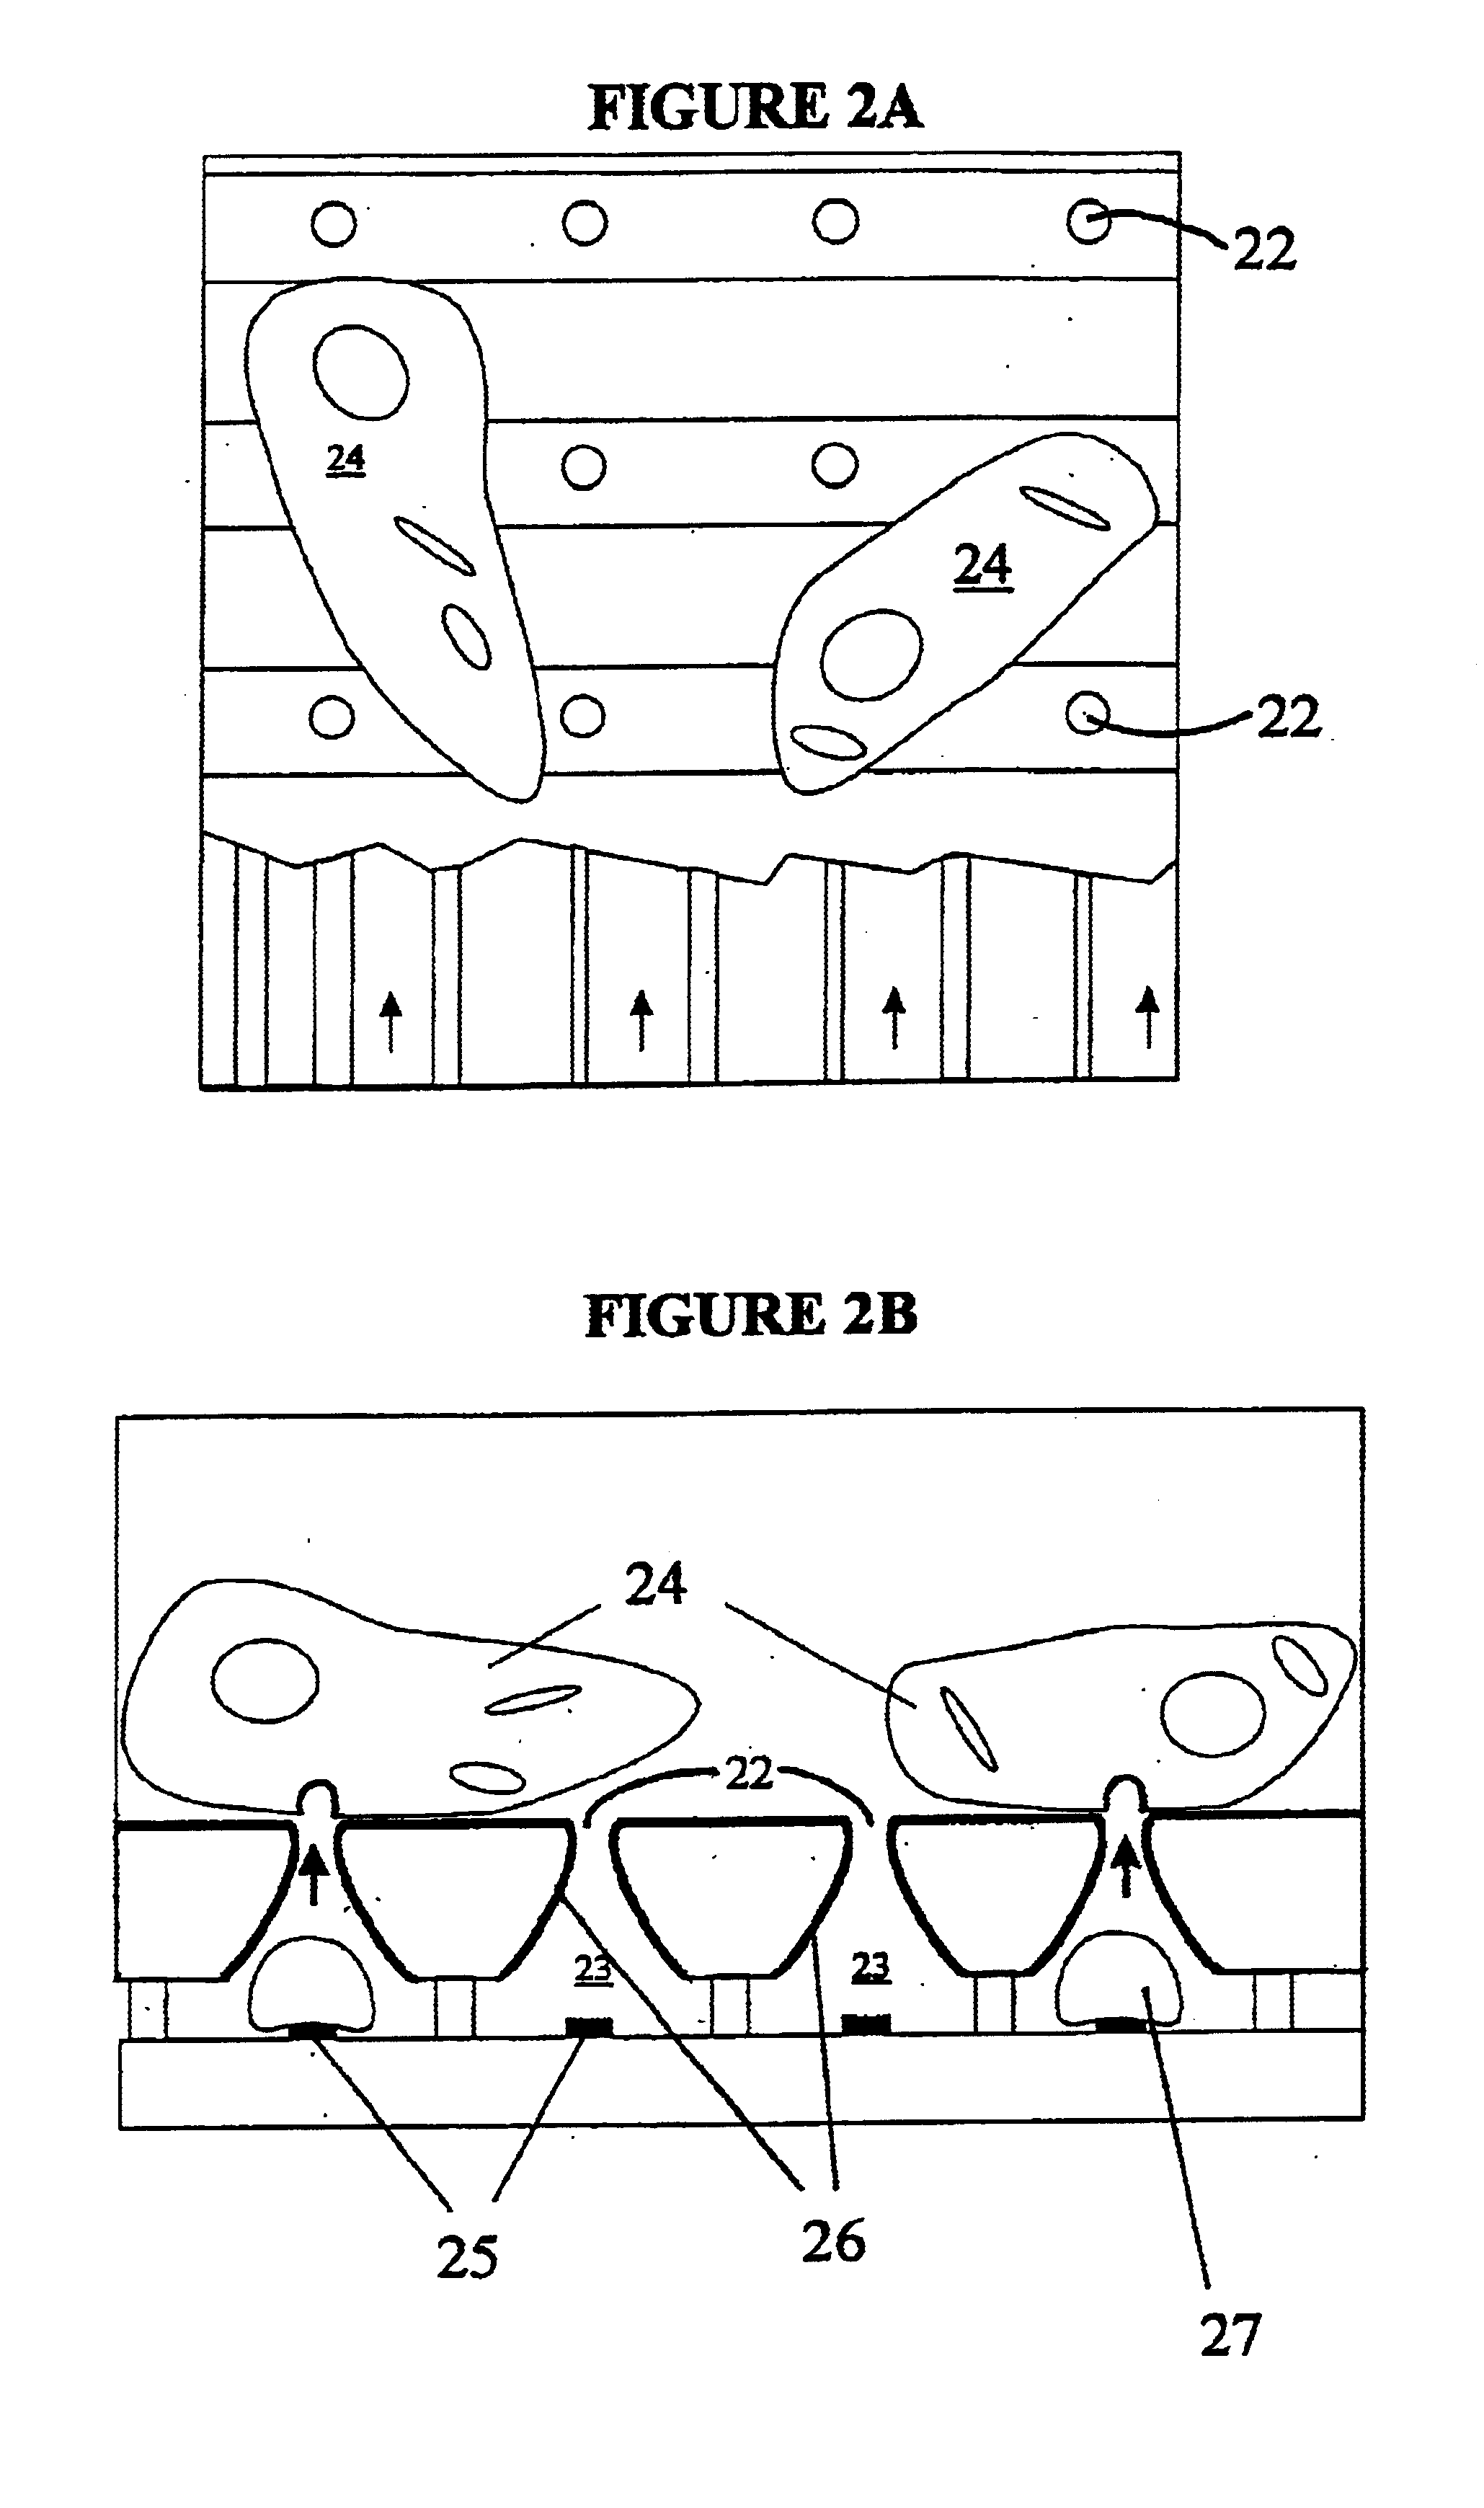 Microfluidic devices and methods for producing pulsed microfluidic jets in a liquid environment